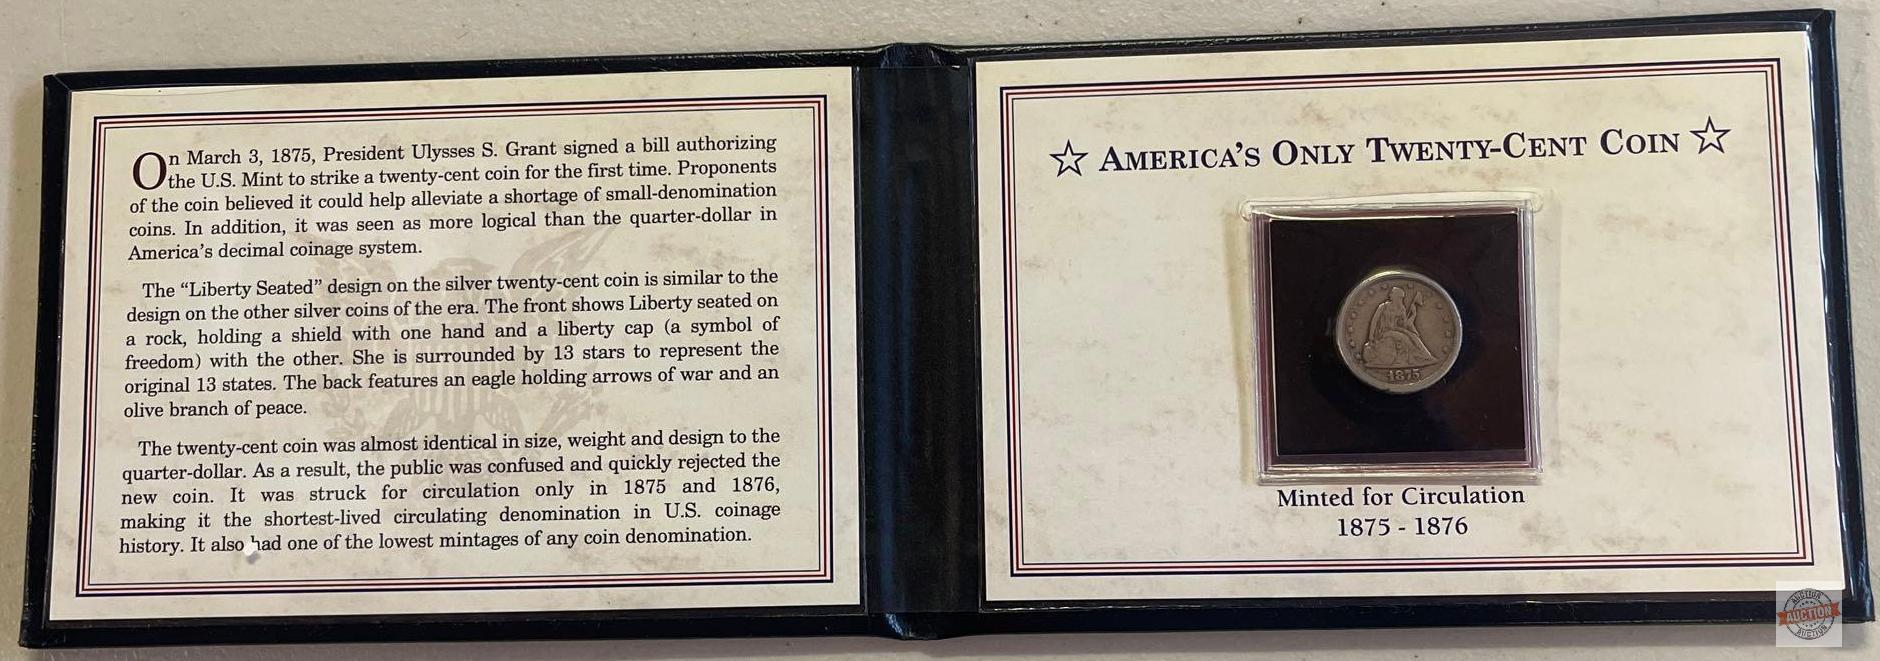 $.20 Cent Coin, 1875s Silver - America's Only Twenty-Cent Coin, PCS Stamps & Coins in Folio